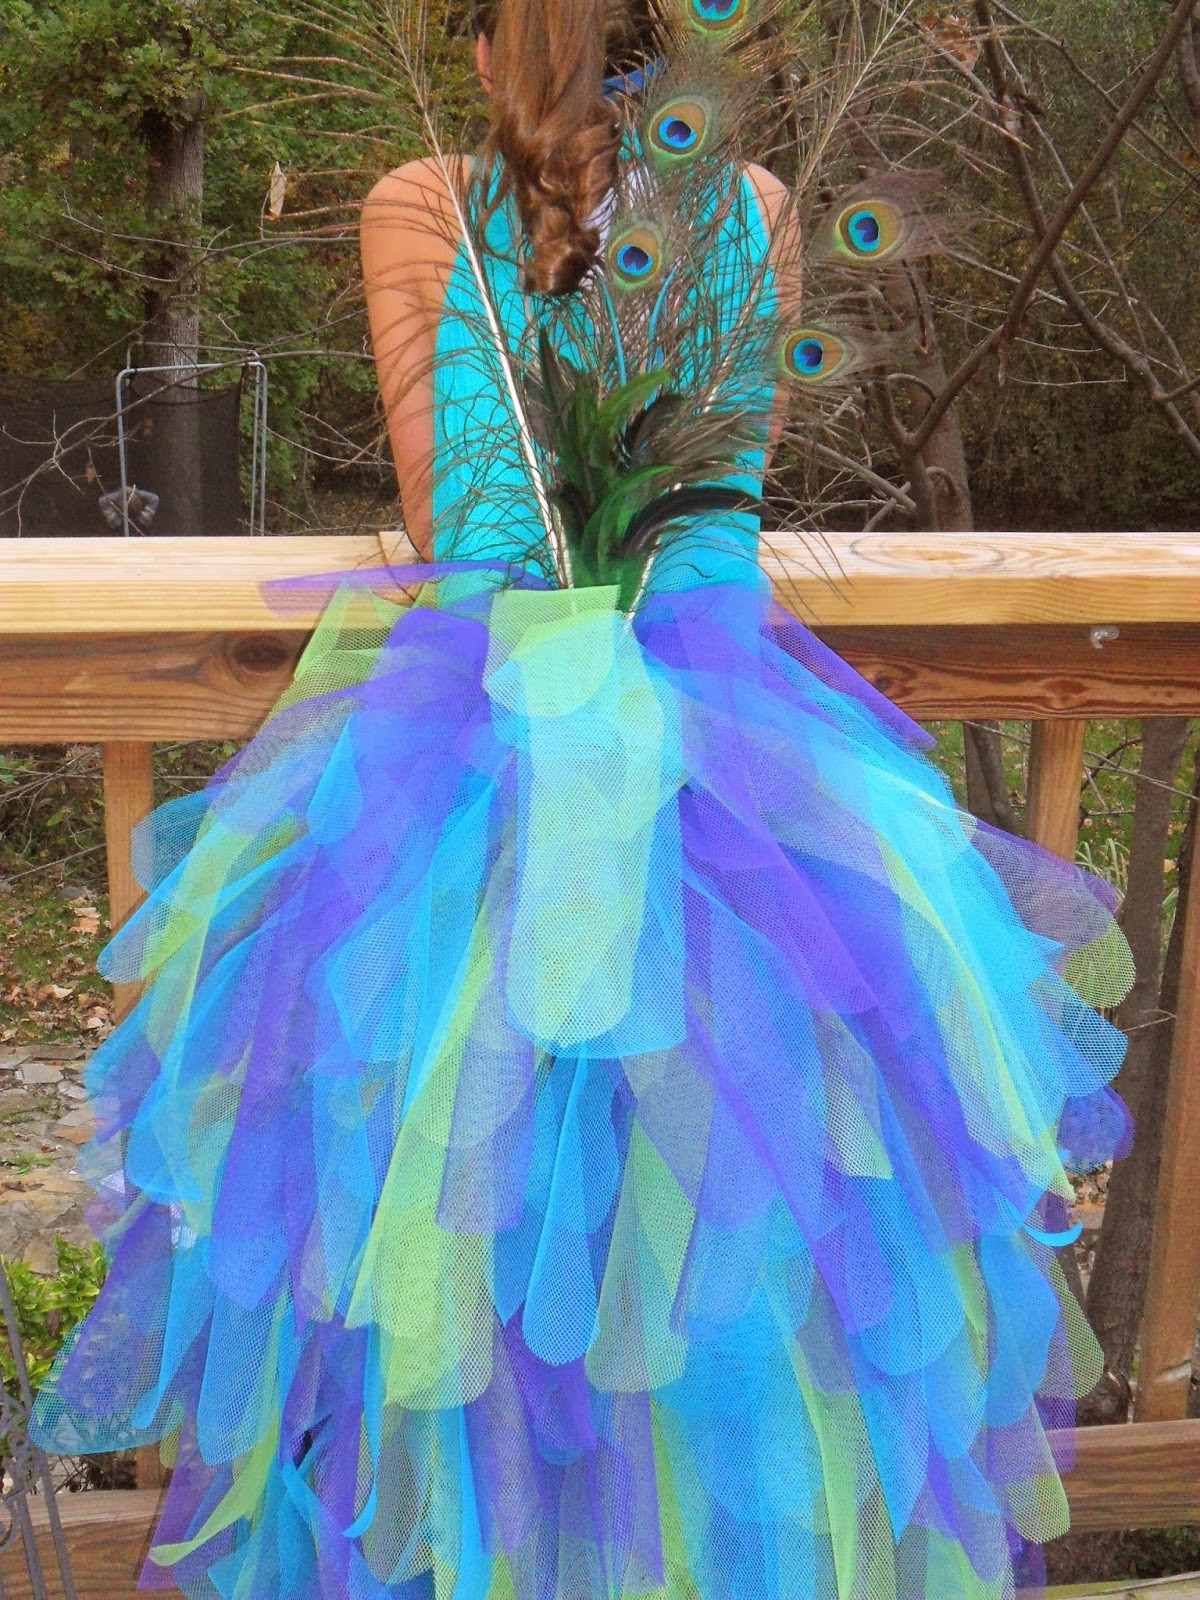 Peacock Halloween Costumes DIY
 A peacock costume a voodoo doll costume and a whole lotta